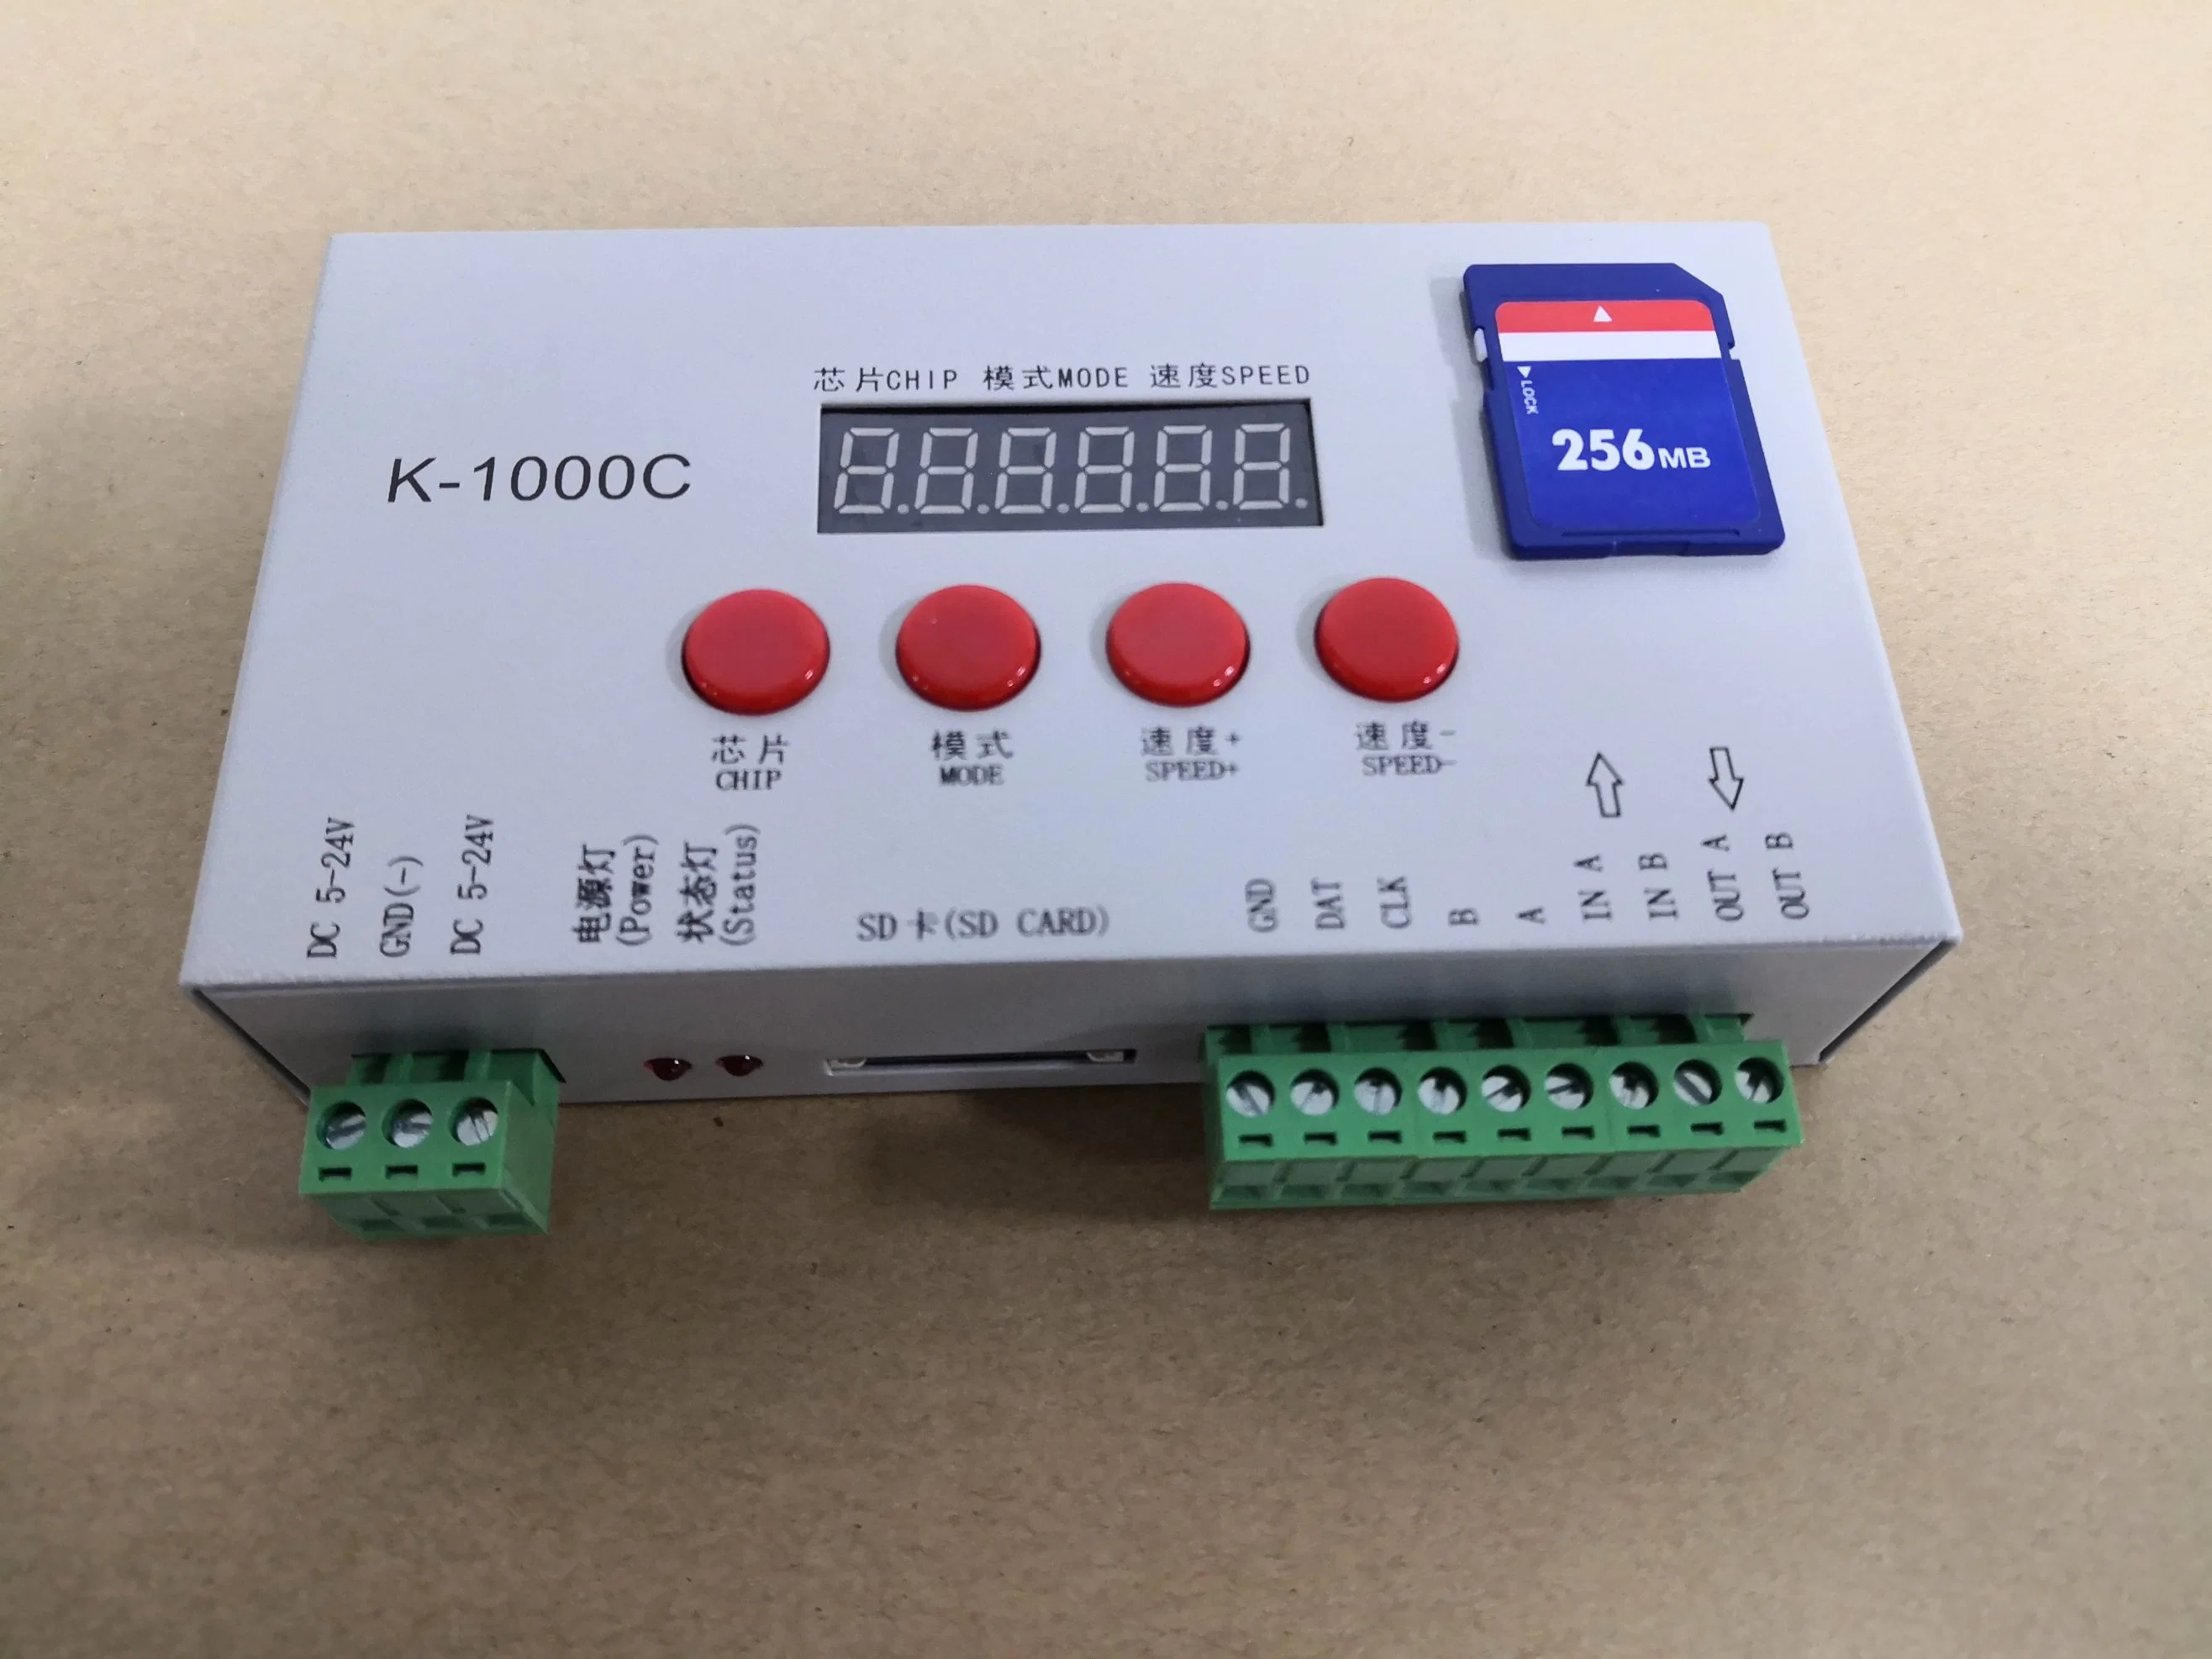 K-1000c Ws2812b LED RGB Controller, T-1000s Upgraded Version, Compatible with Ws2812b/Apa102/Sk6812/Ws2811/Ws2801